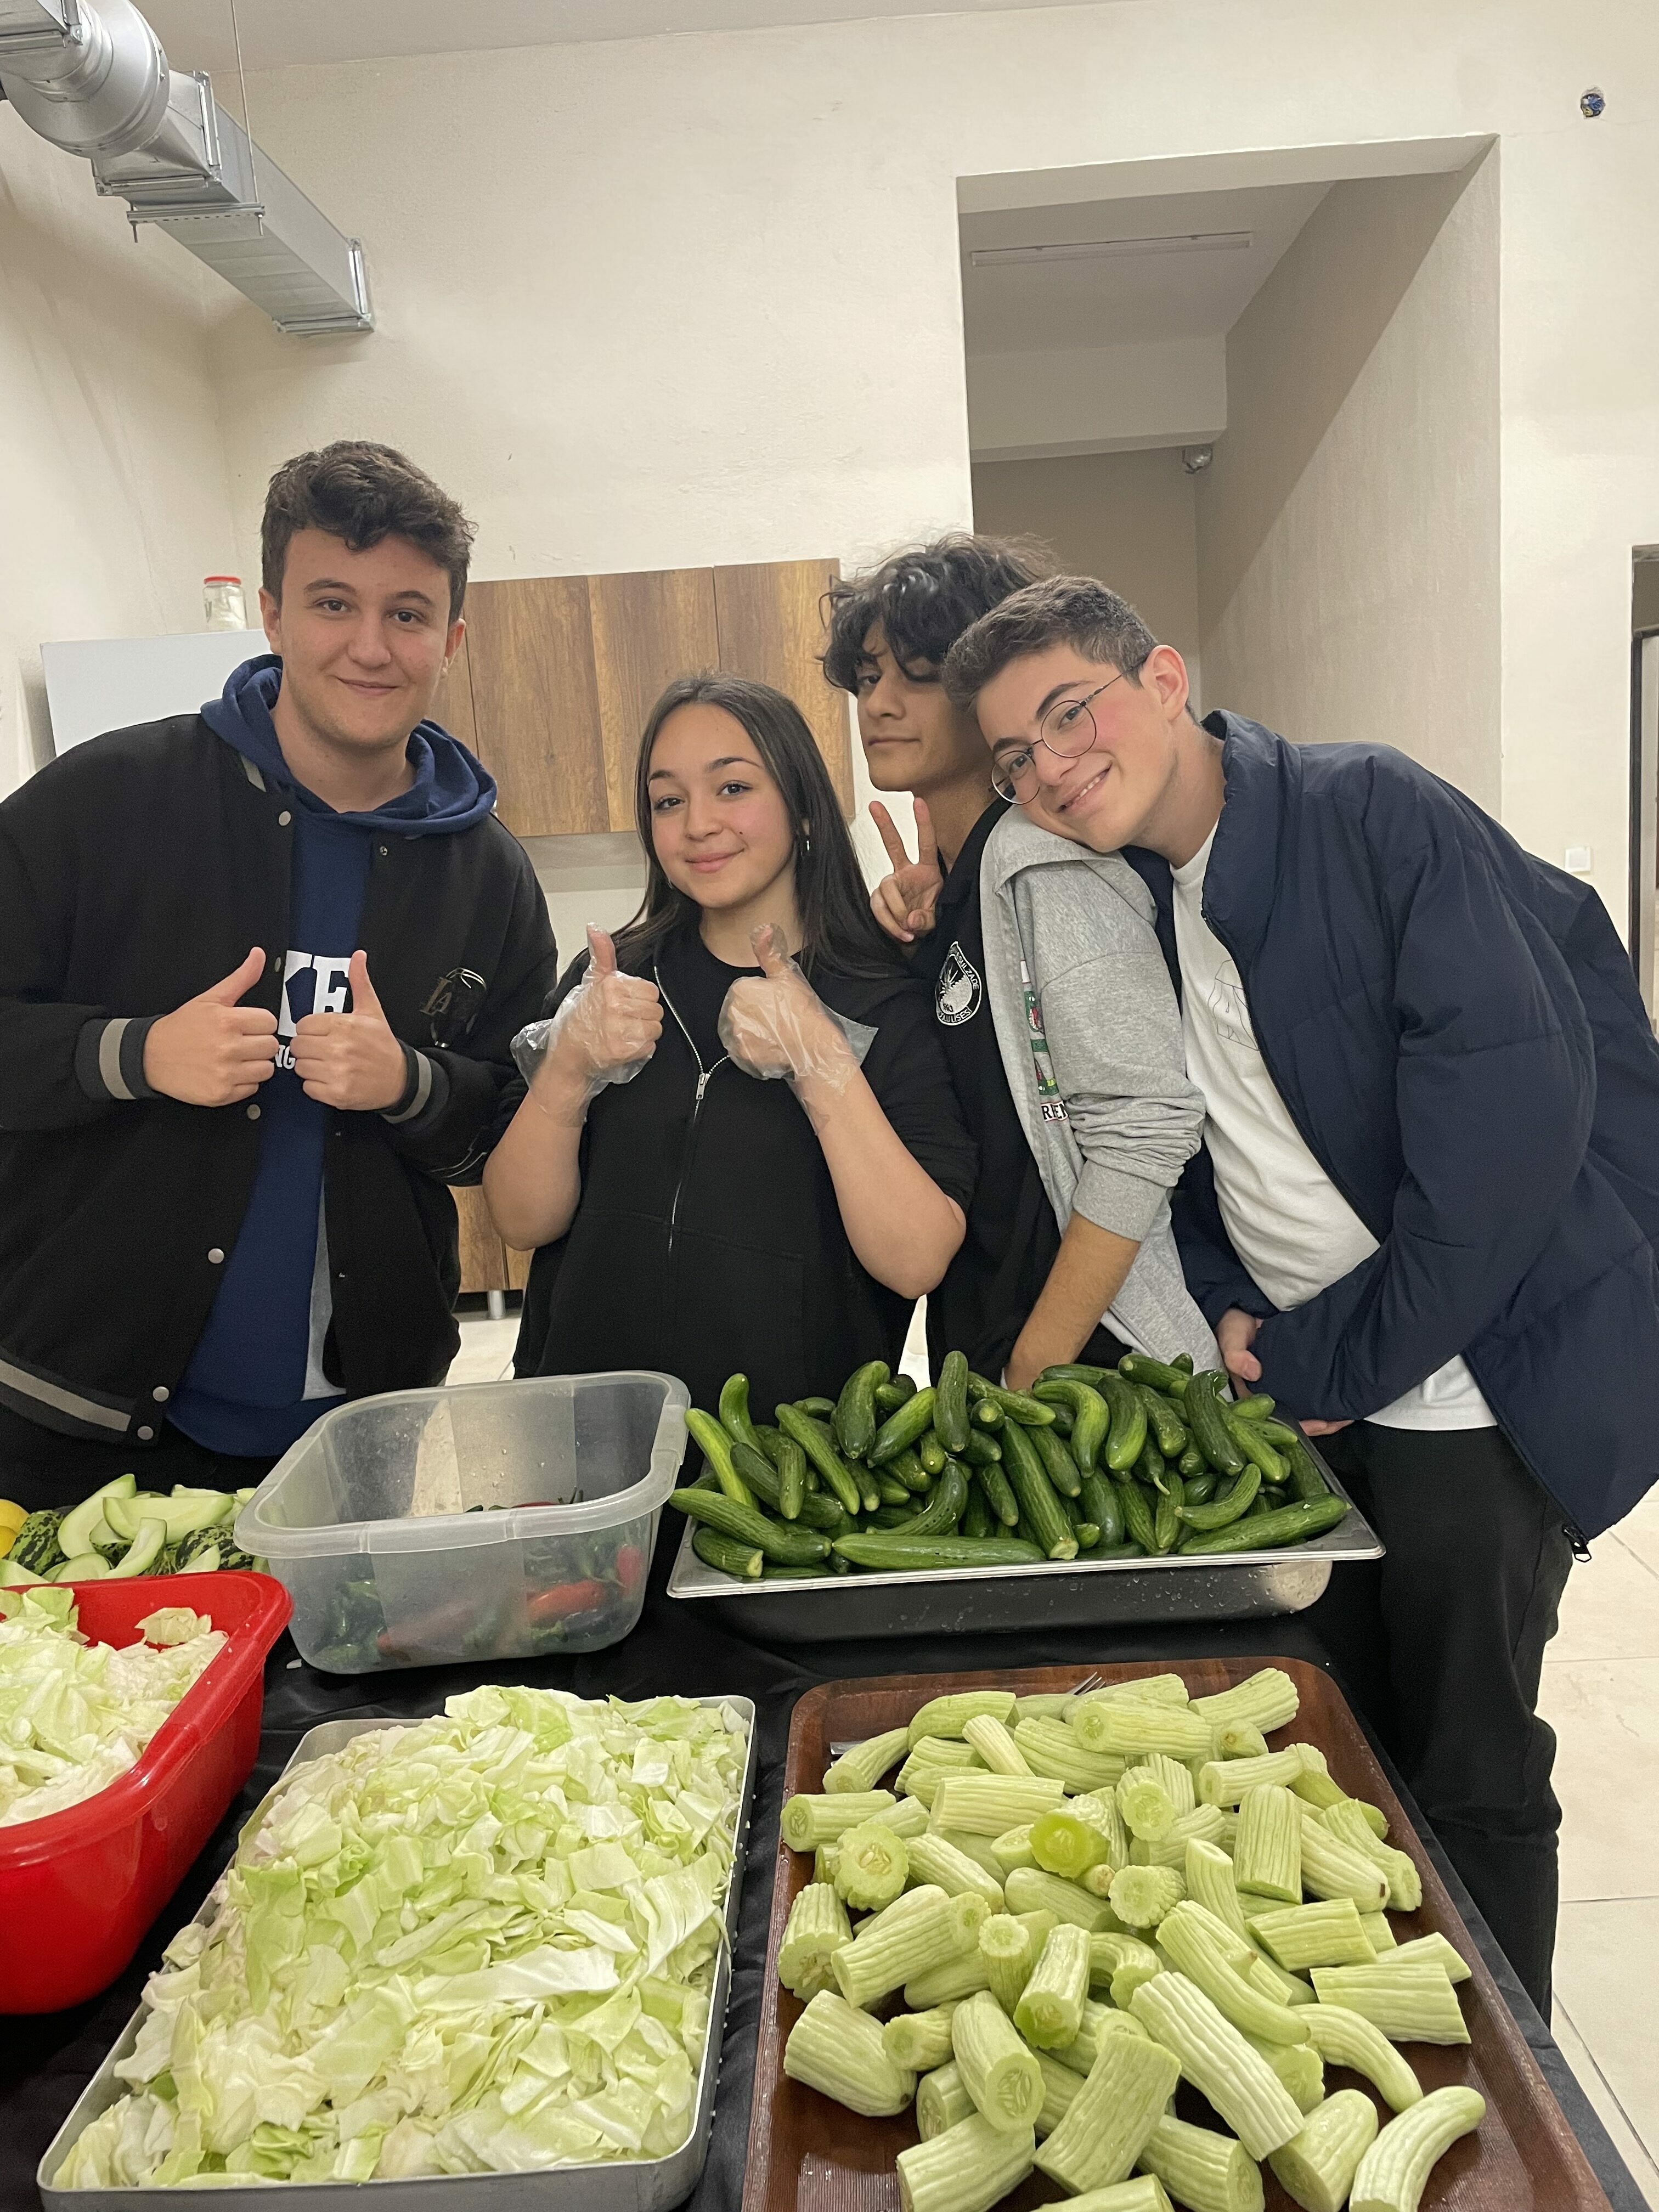 Martine and 3 classmates smiling over food they are preparing